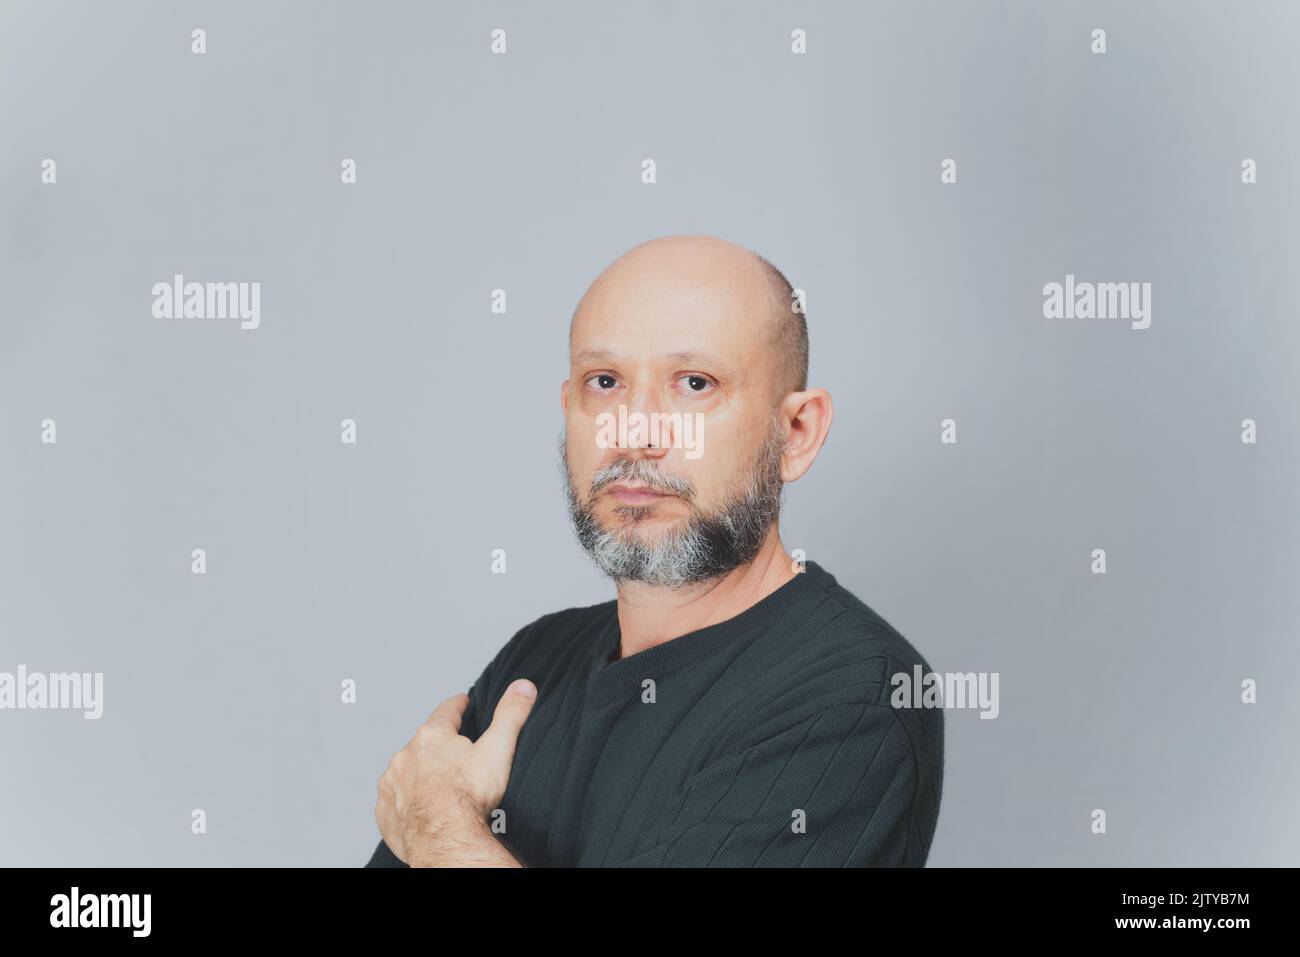 Portrait of mature man standing on white background. Serious bearded man. Formal style. Stock Photo